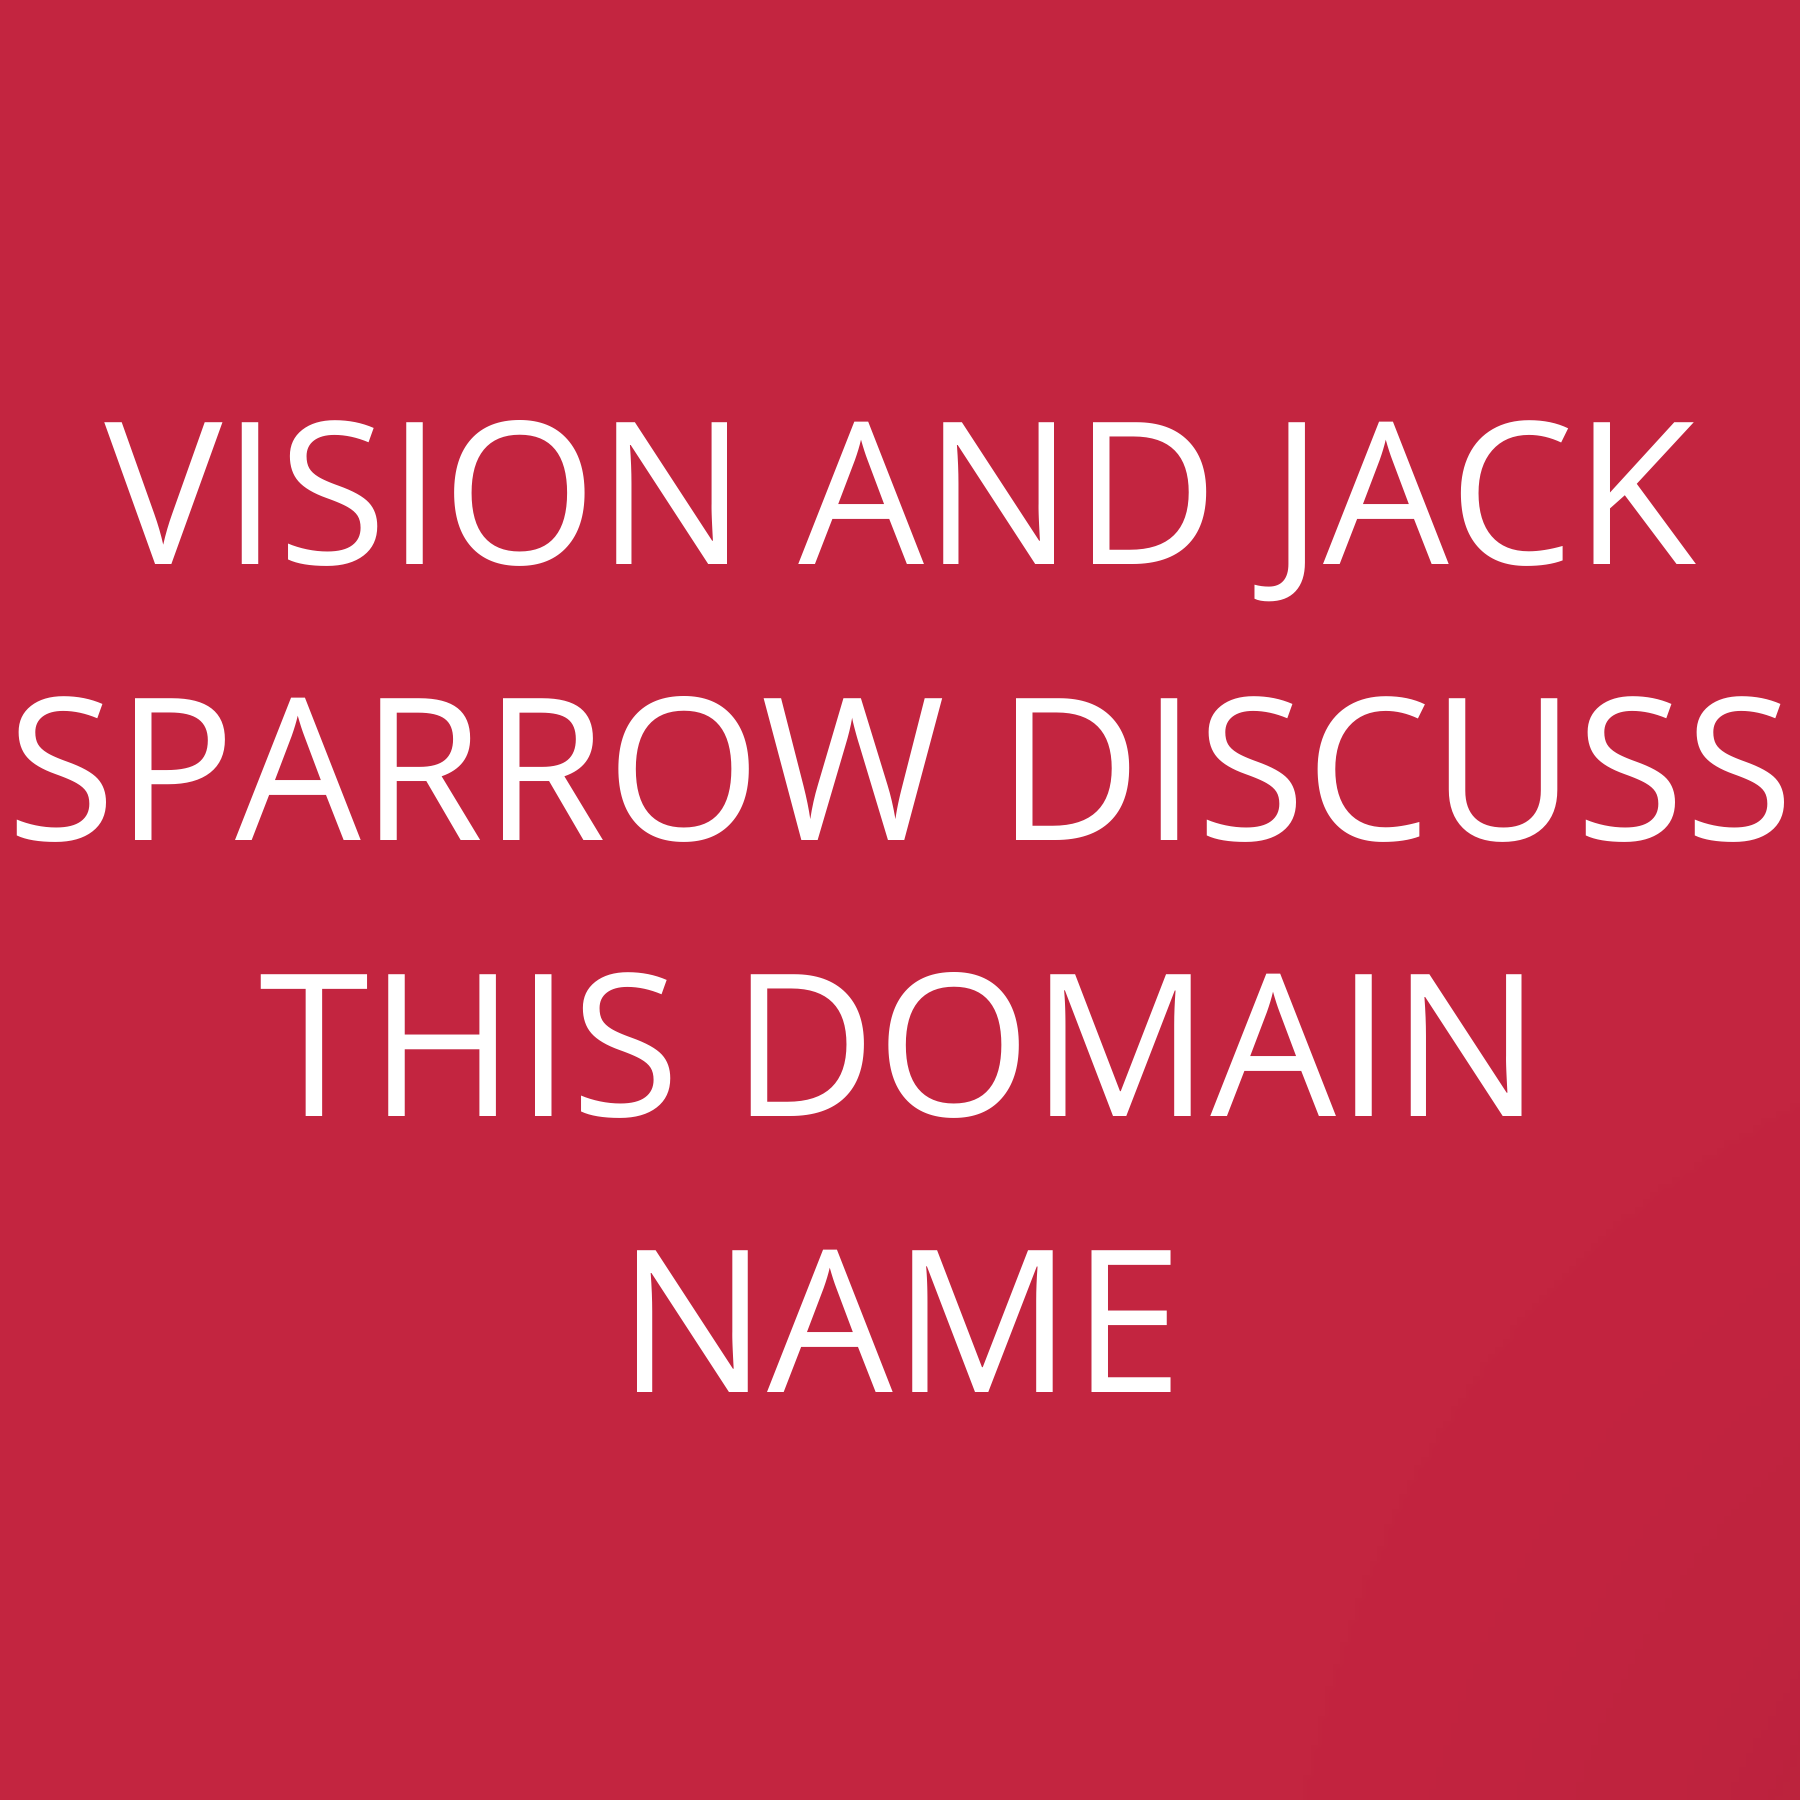 Vision and Jack Sparrow discuss this domain name